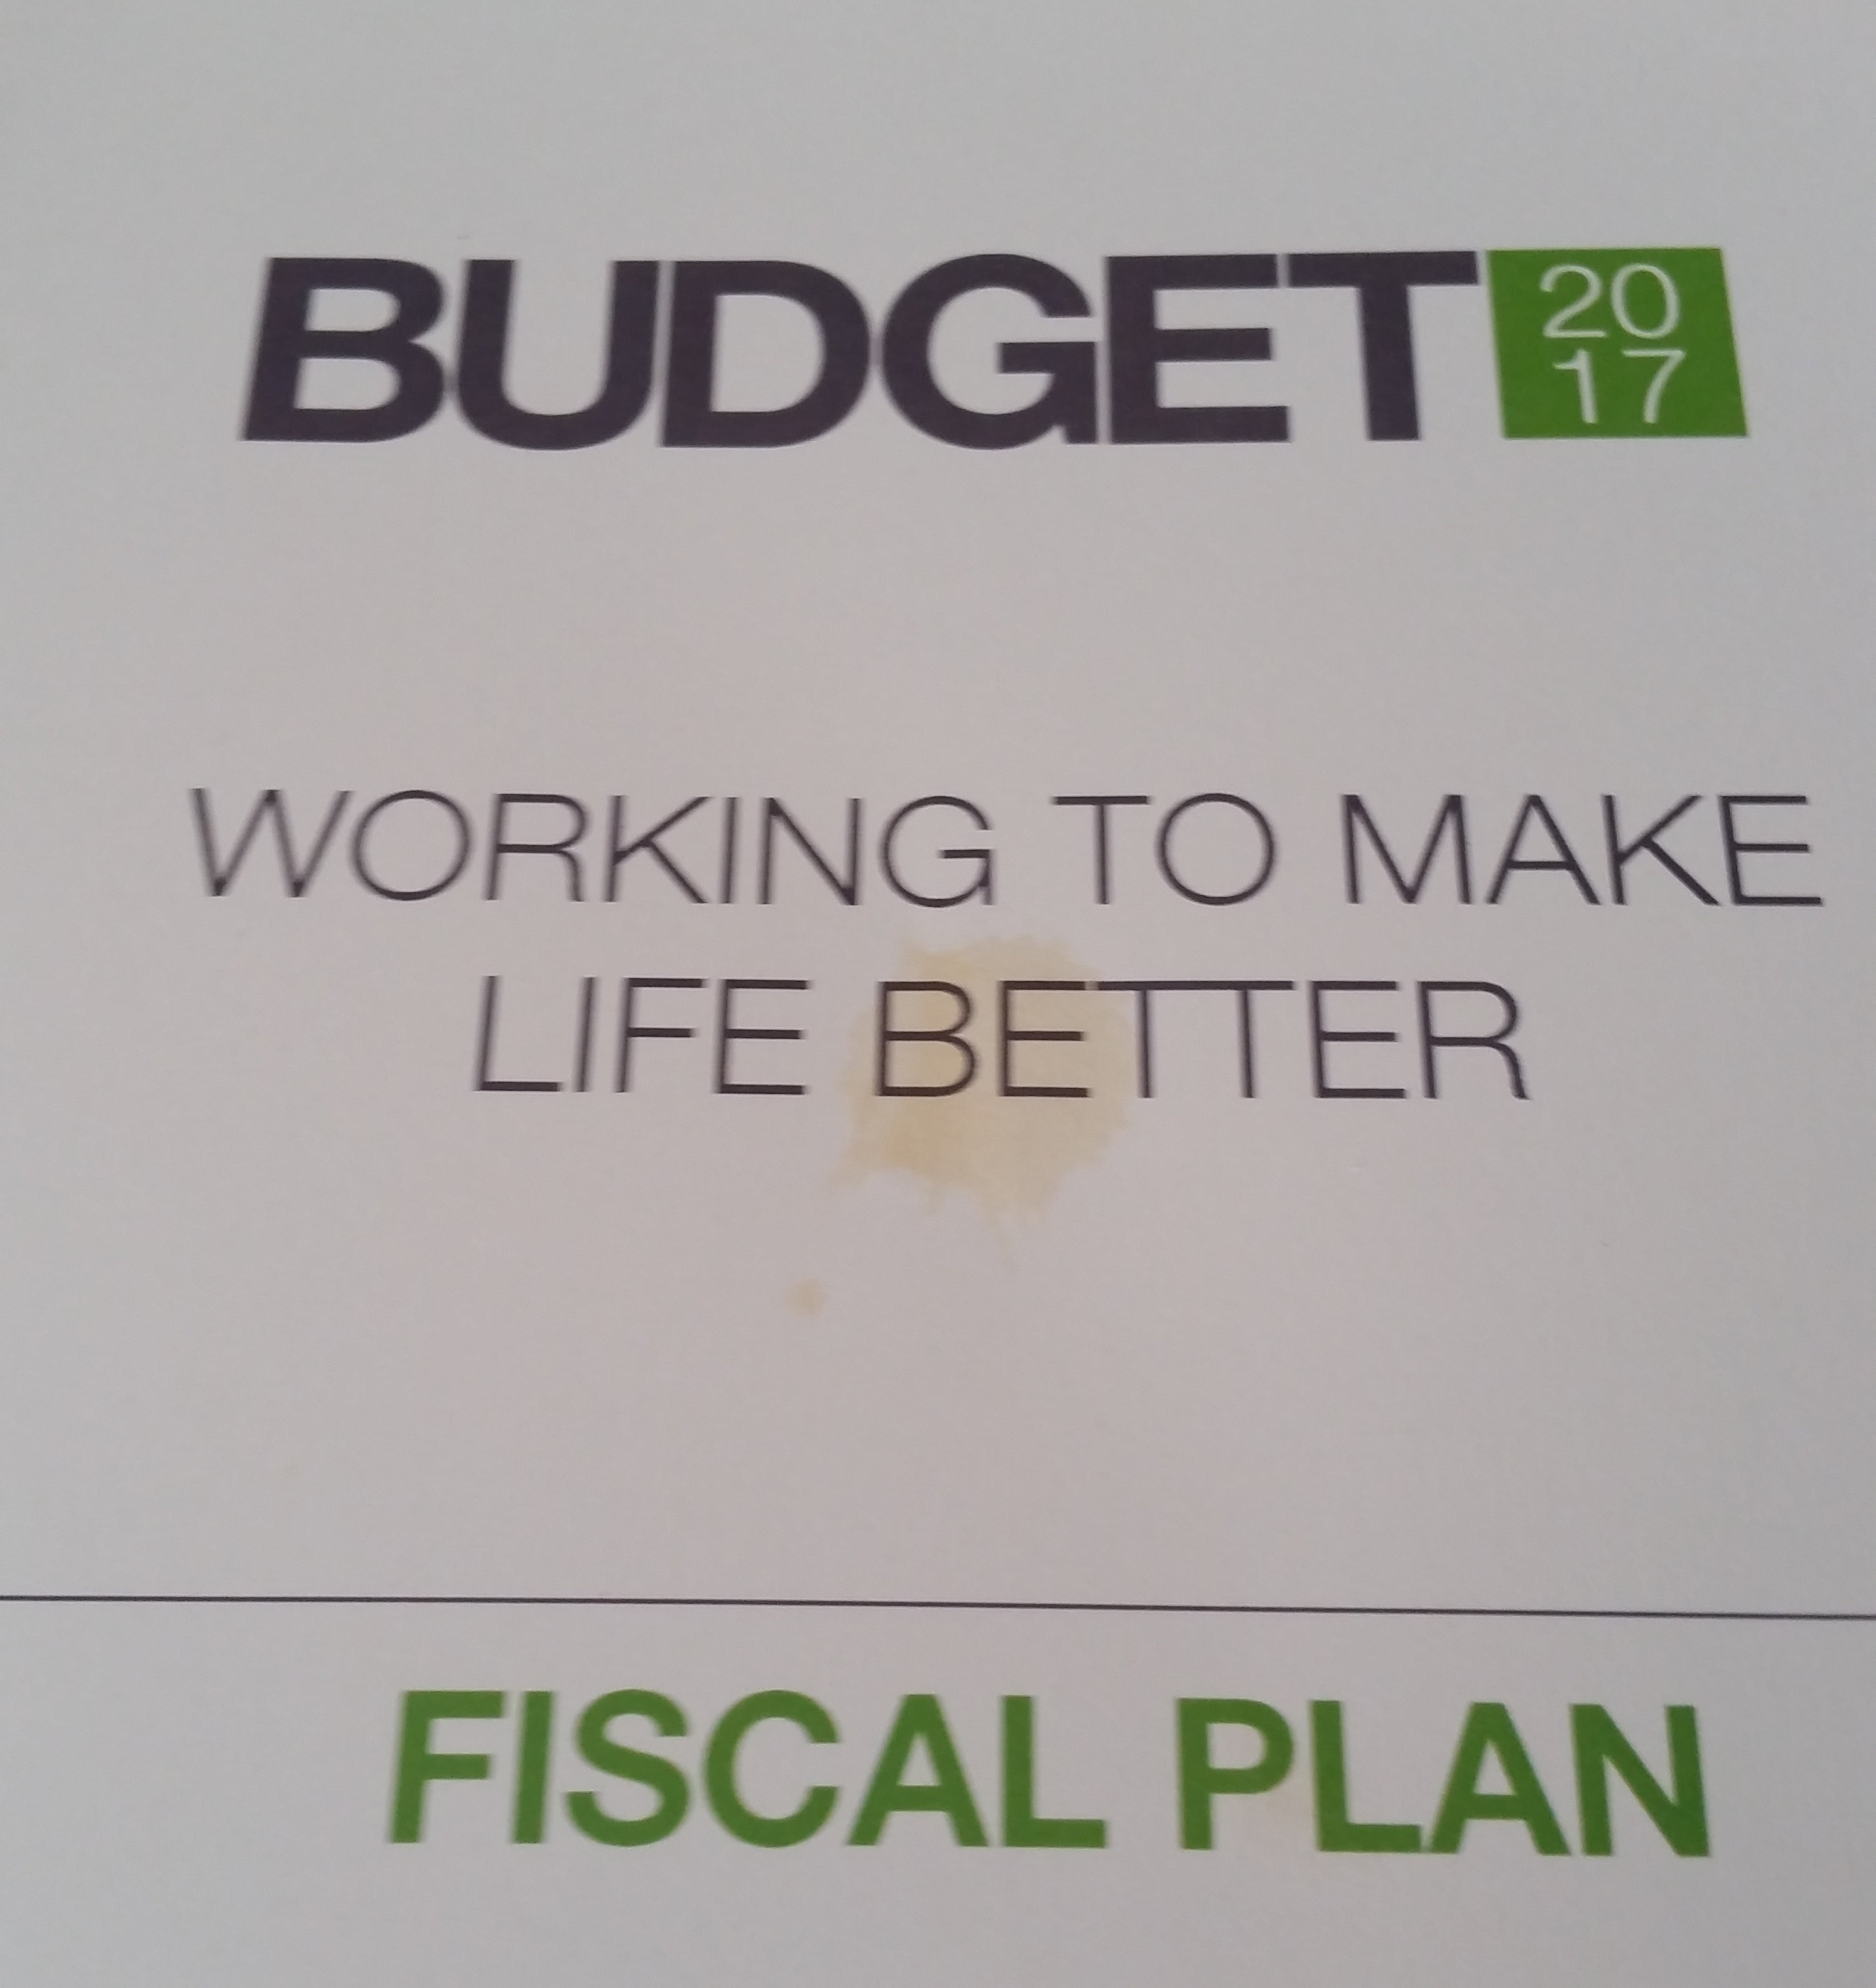 Not a great start to Budget 2017